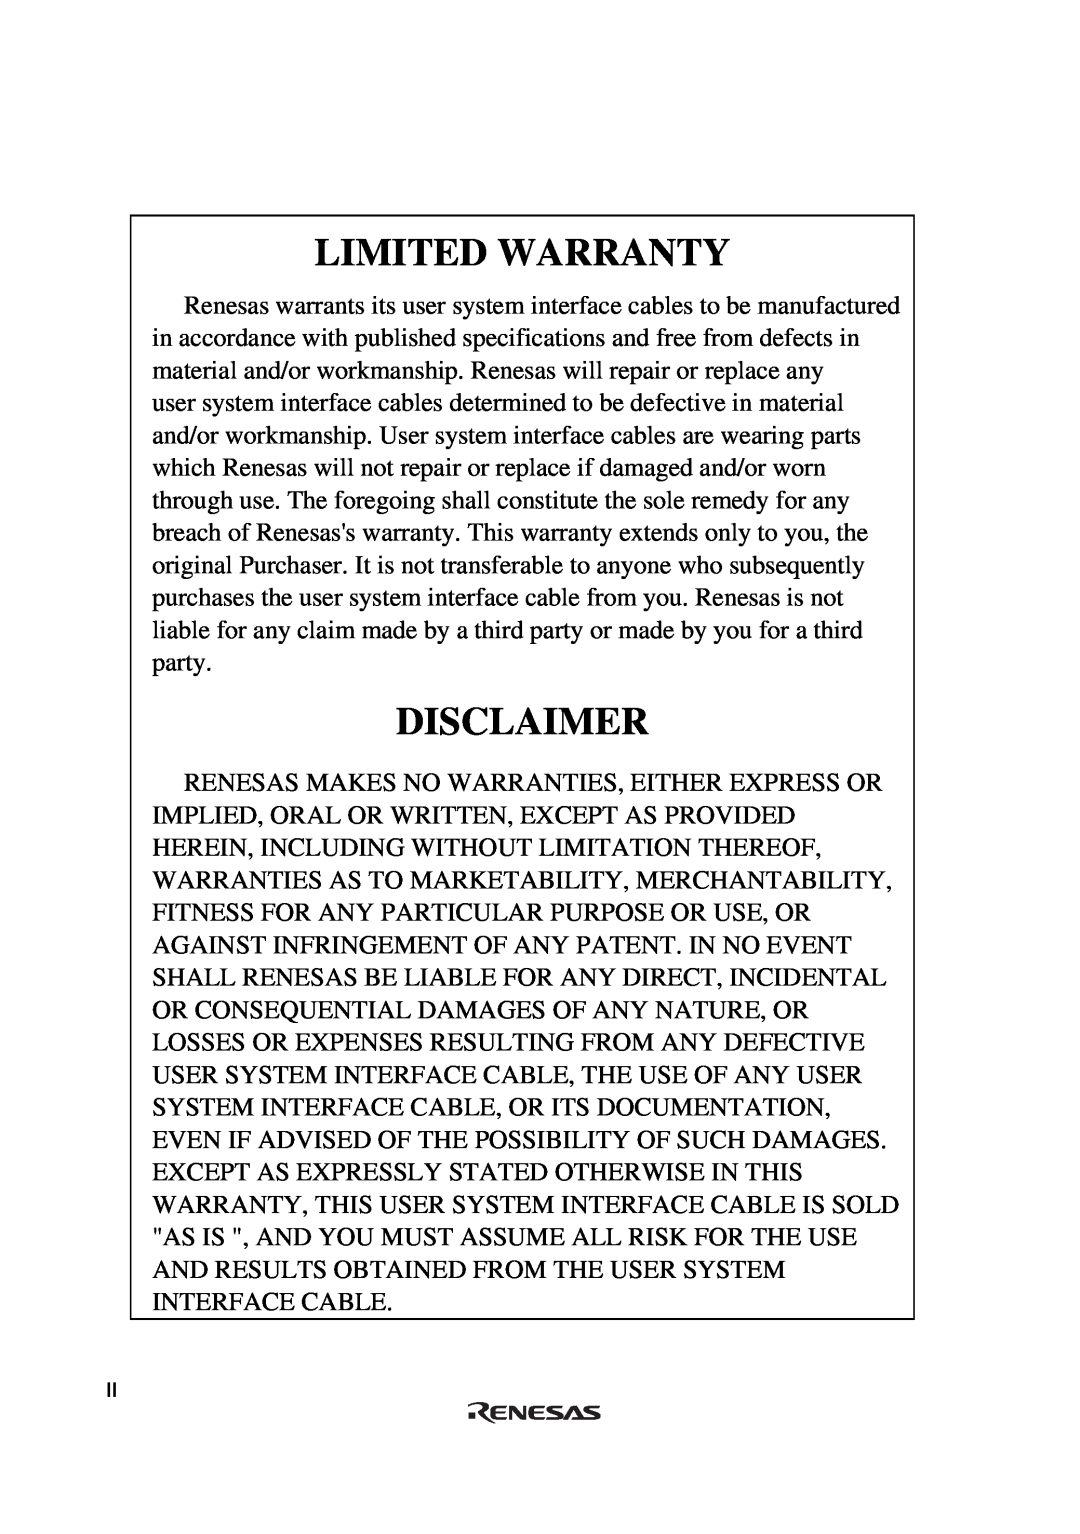 Renesas H8S/2615 Series user manual Limited Warranty, Disclaimer 